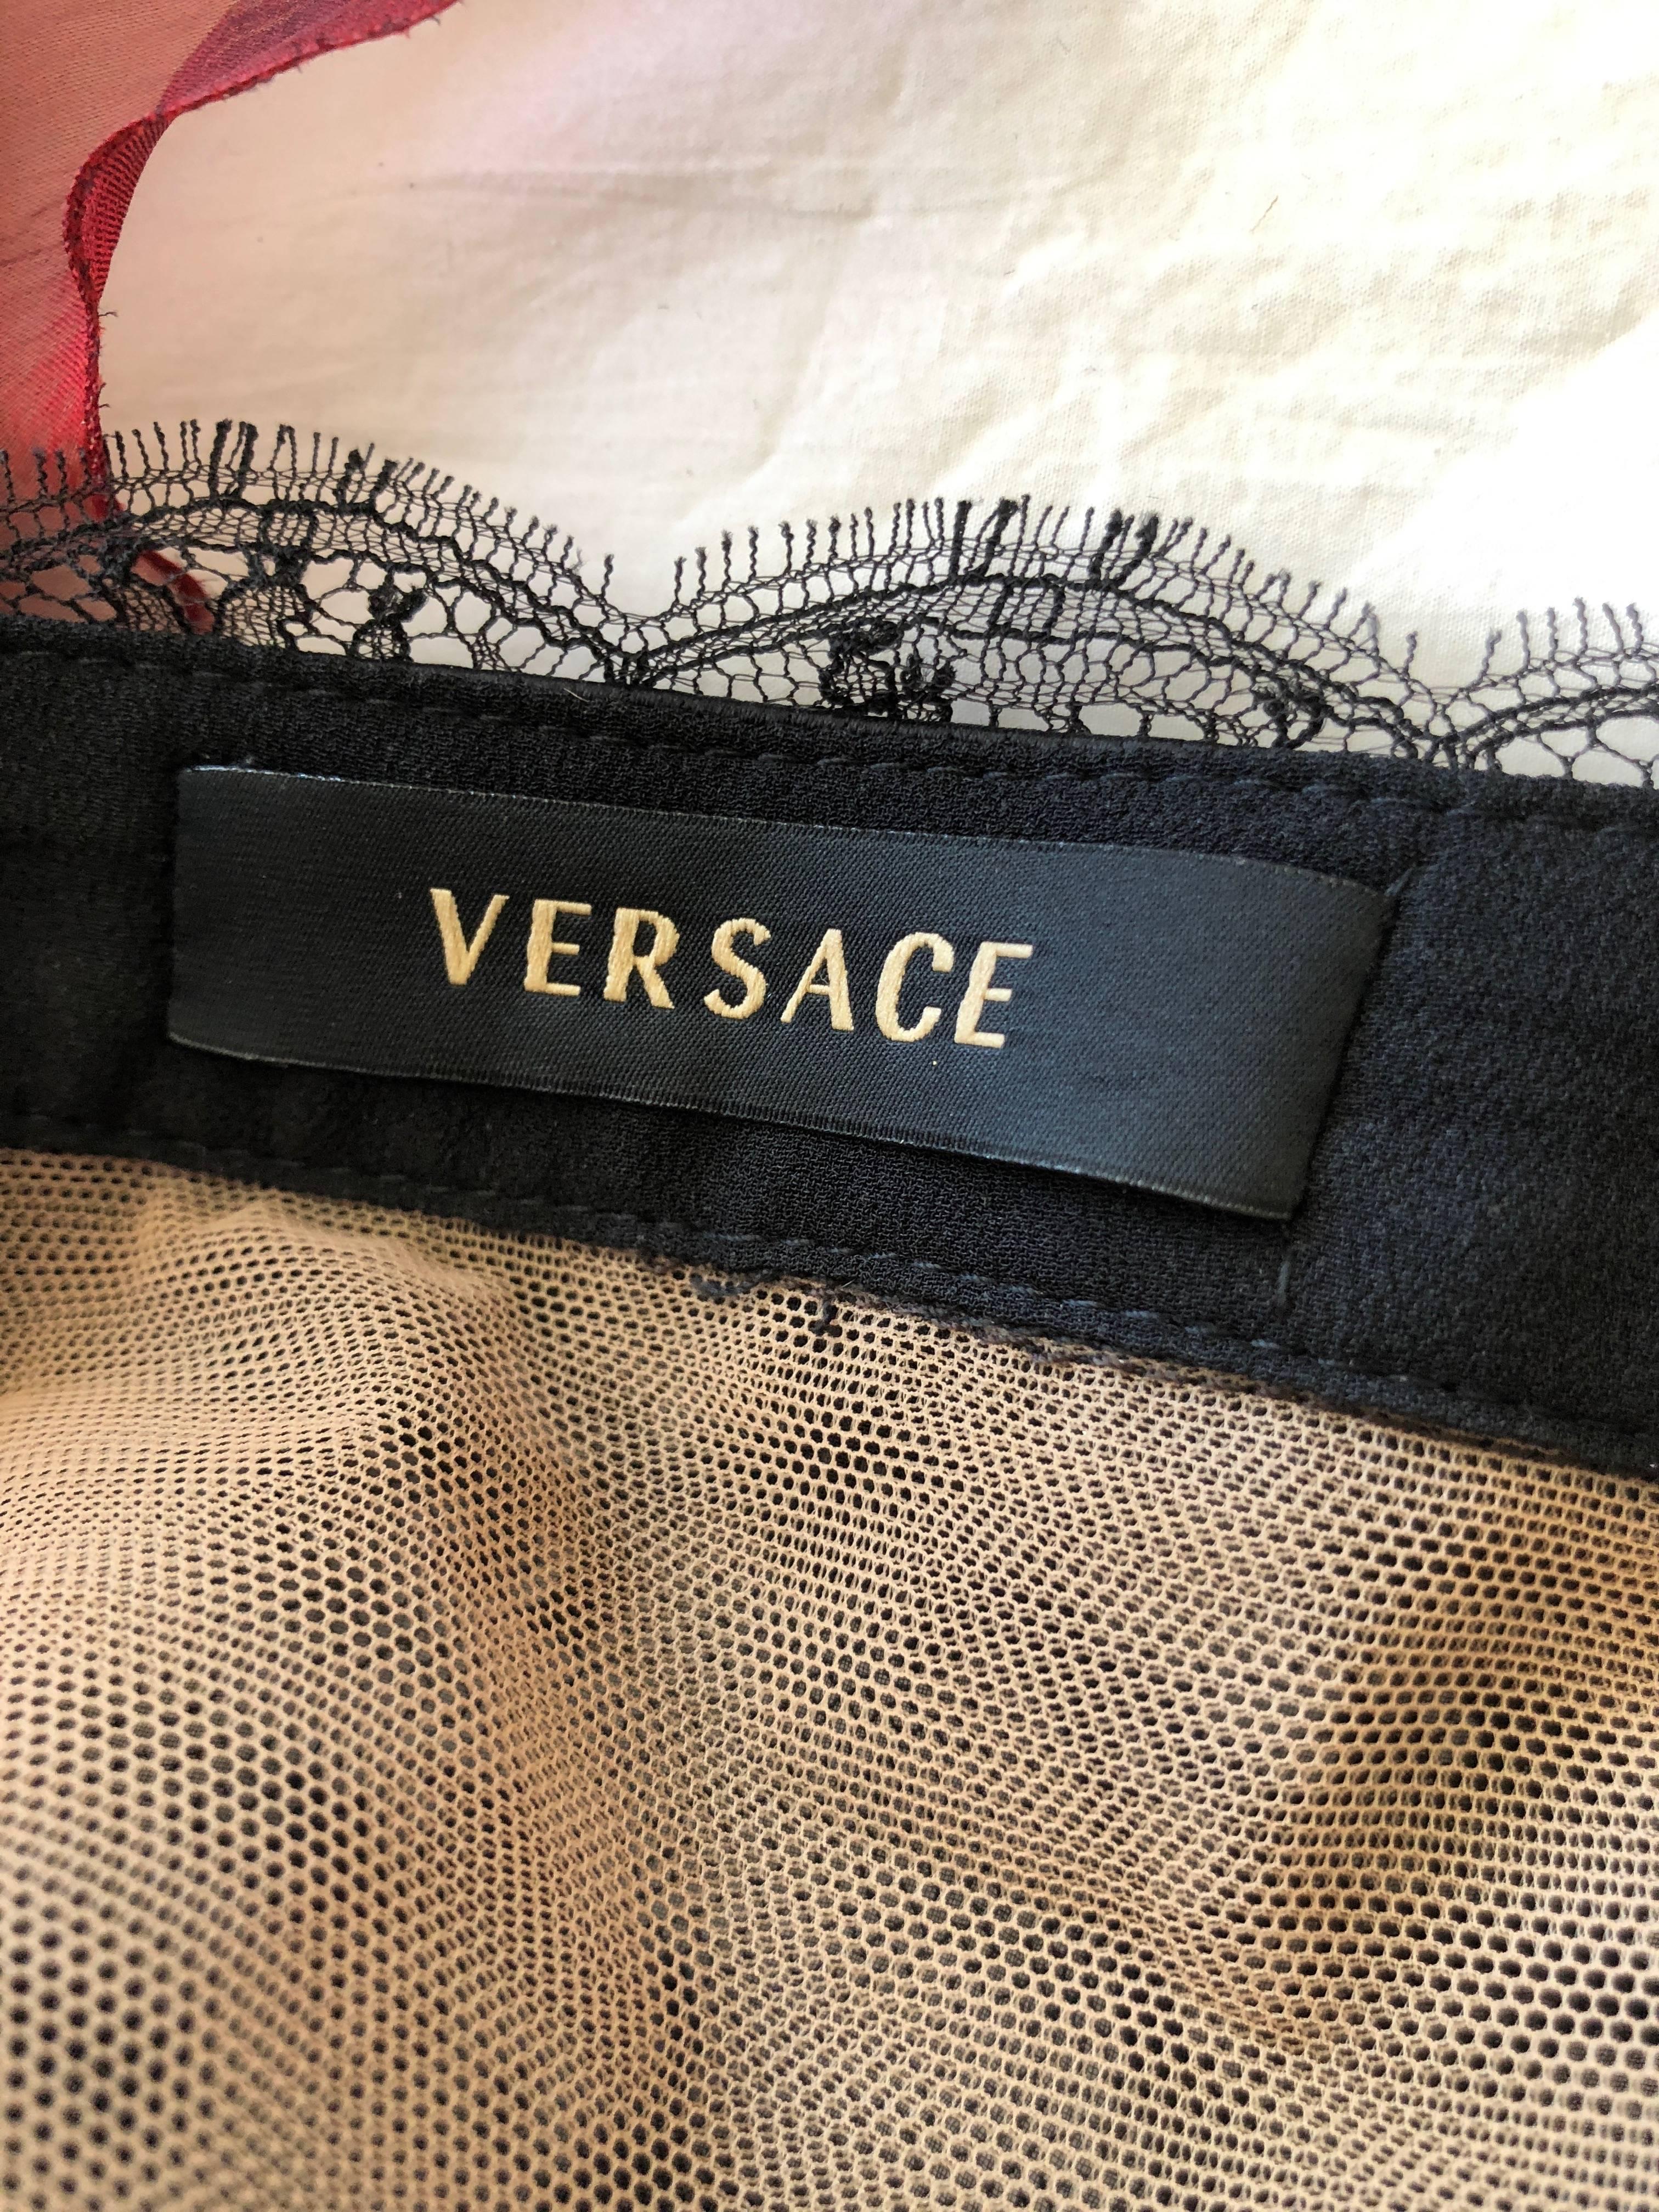 Versace Sheer Lace Accented Vintage Black Lace Mini Cocktail Dress For Sale 5